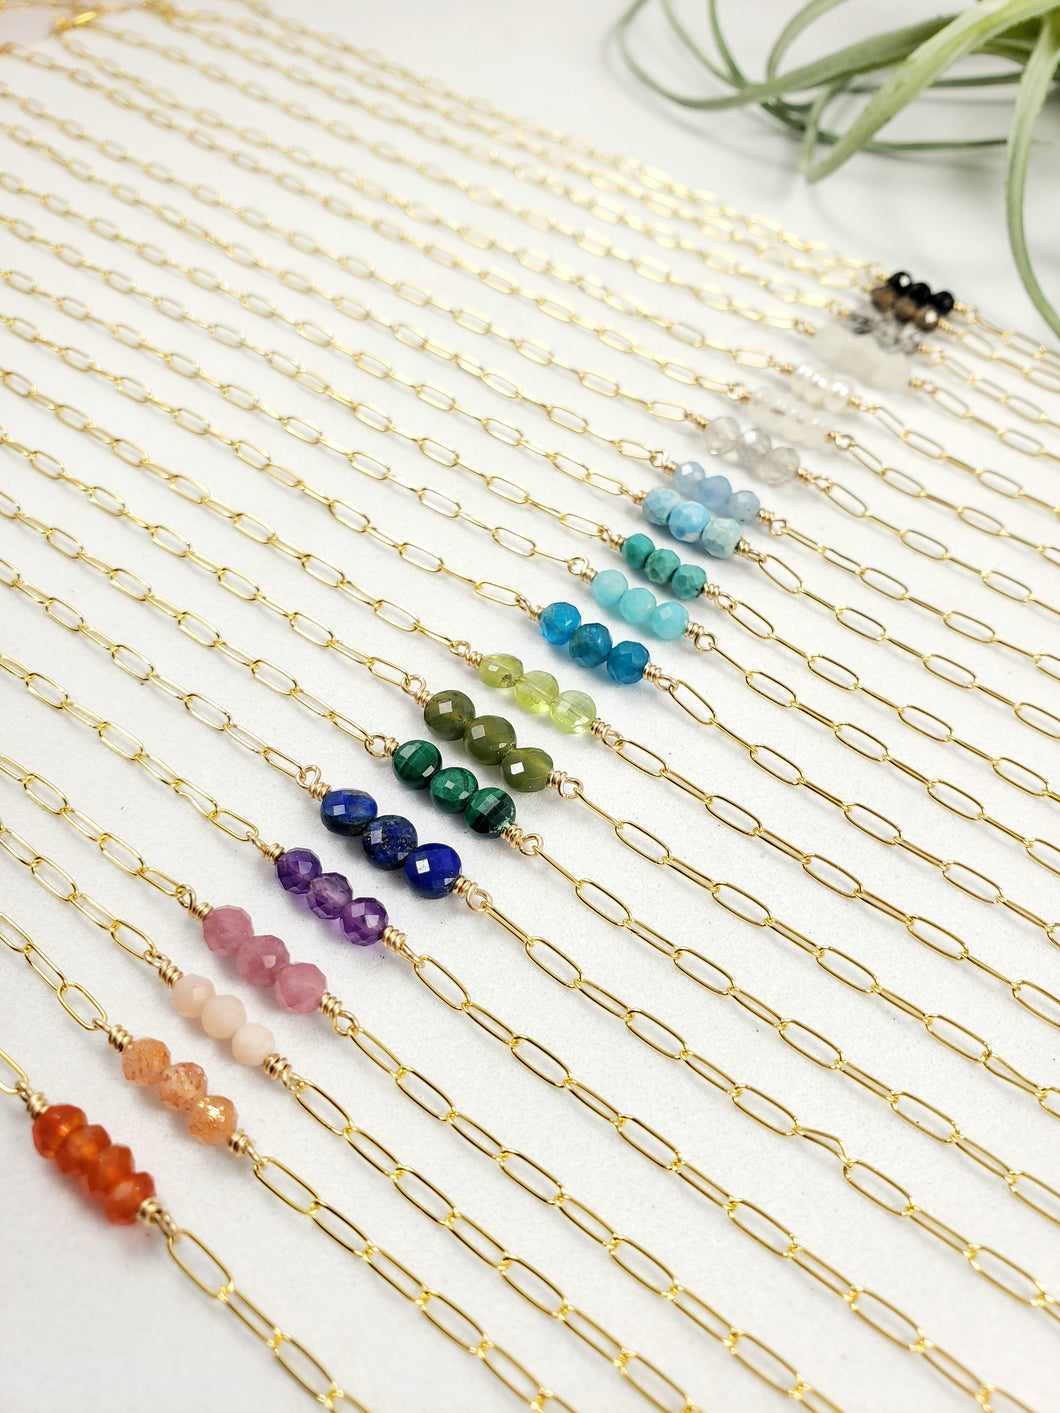 Paperclip chain necklace Gold fill necklace Layering necklaces Gemstone necklace - Shay D. Design